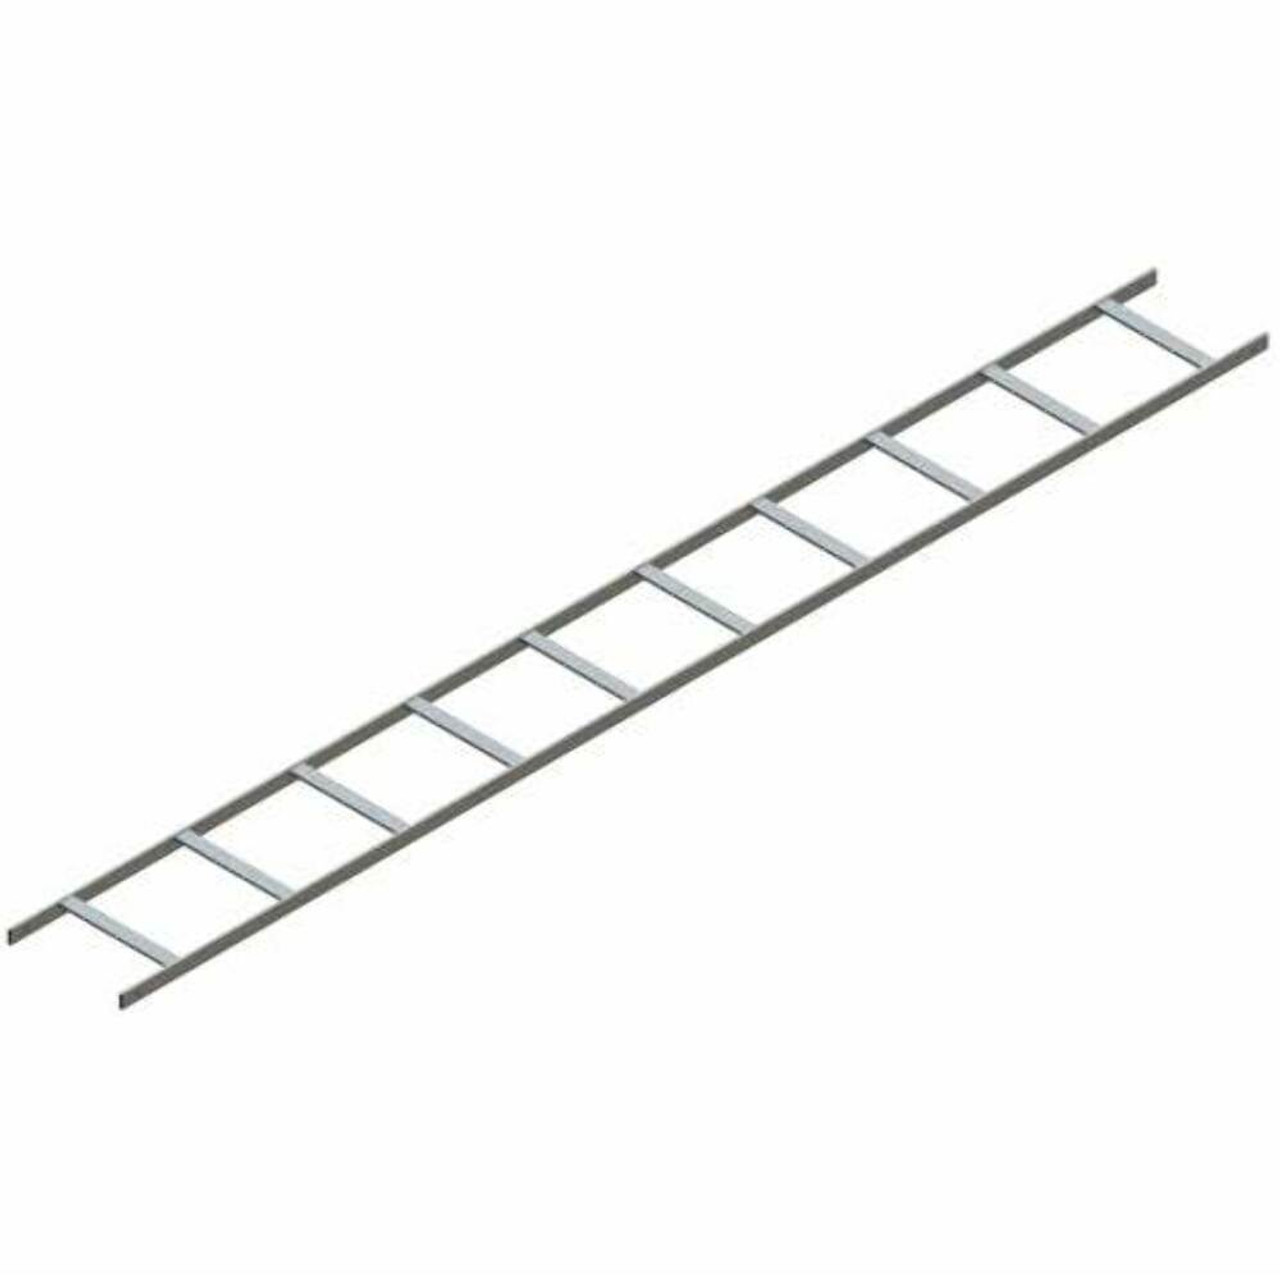 Chatsworth 12X1X105 Cable Runway Ladder Rack